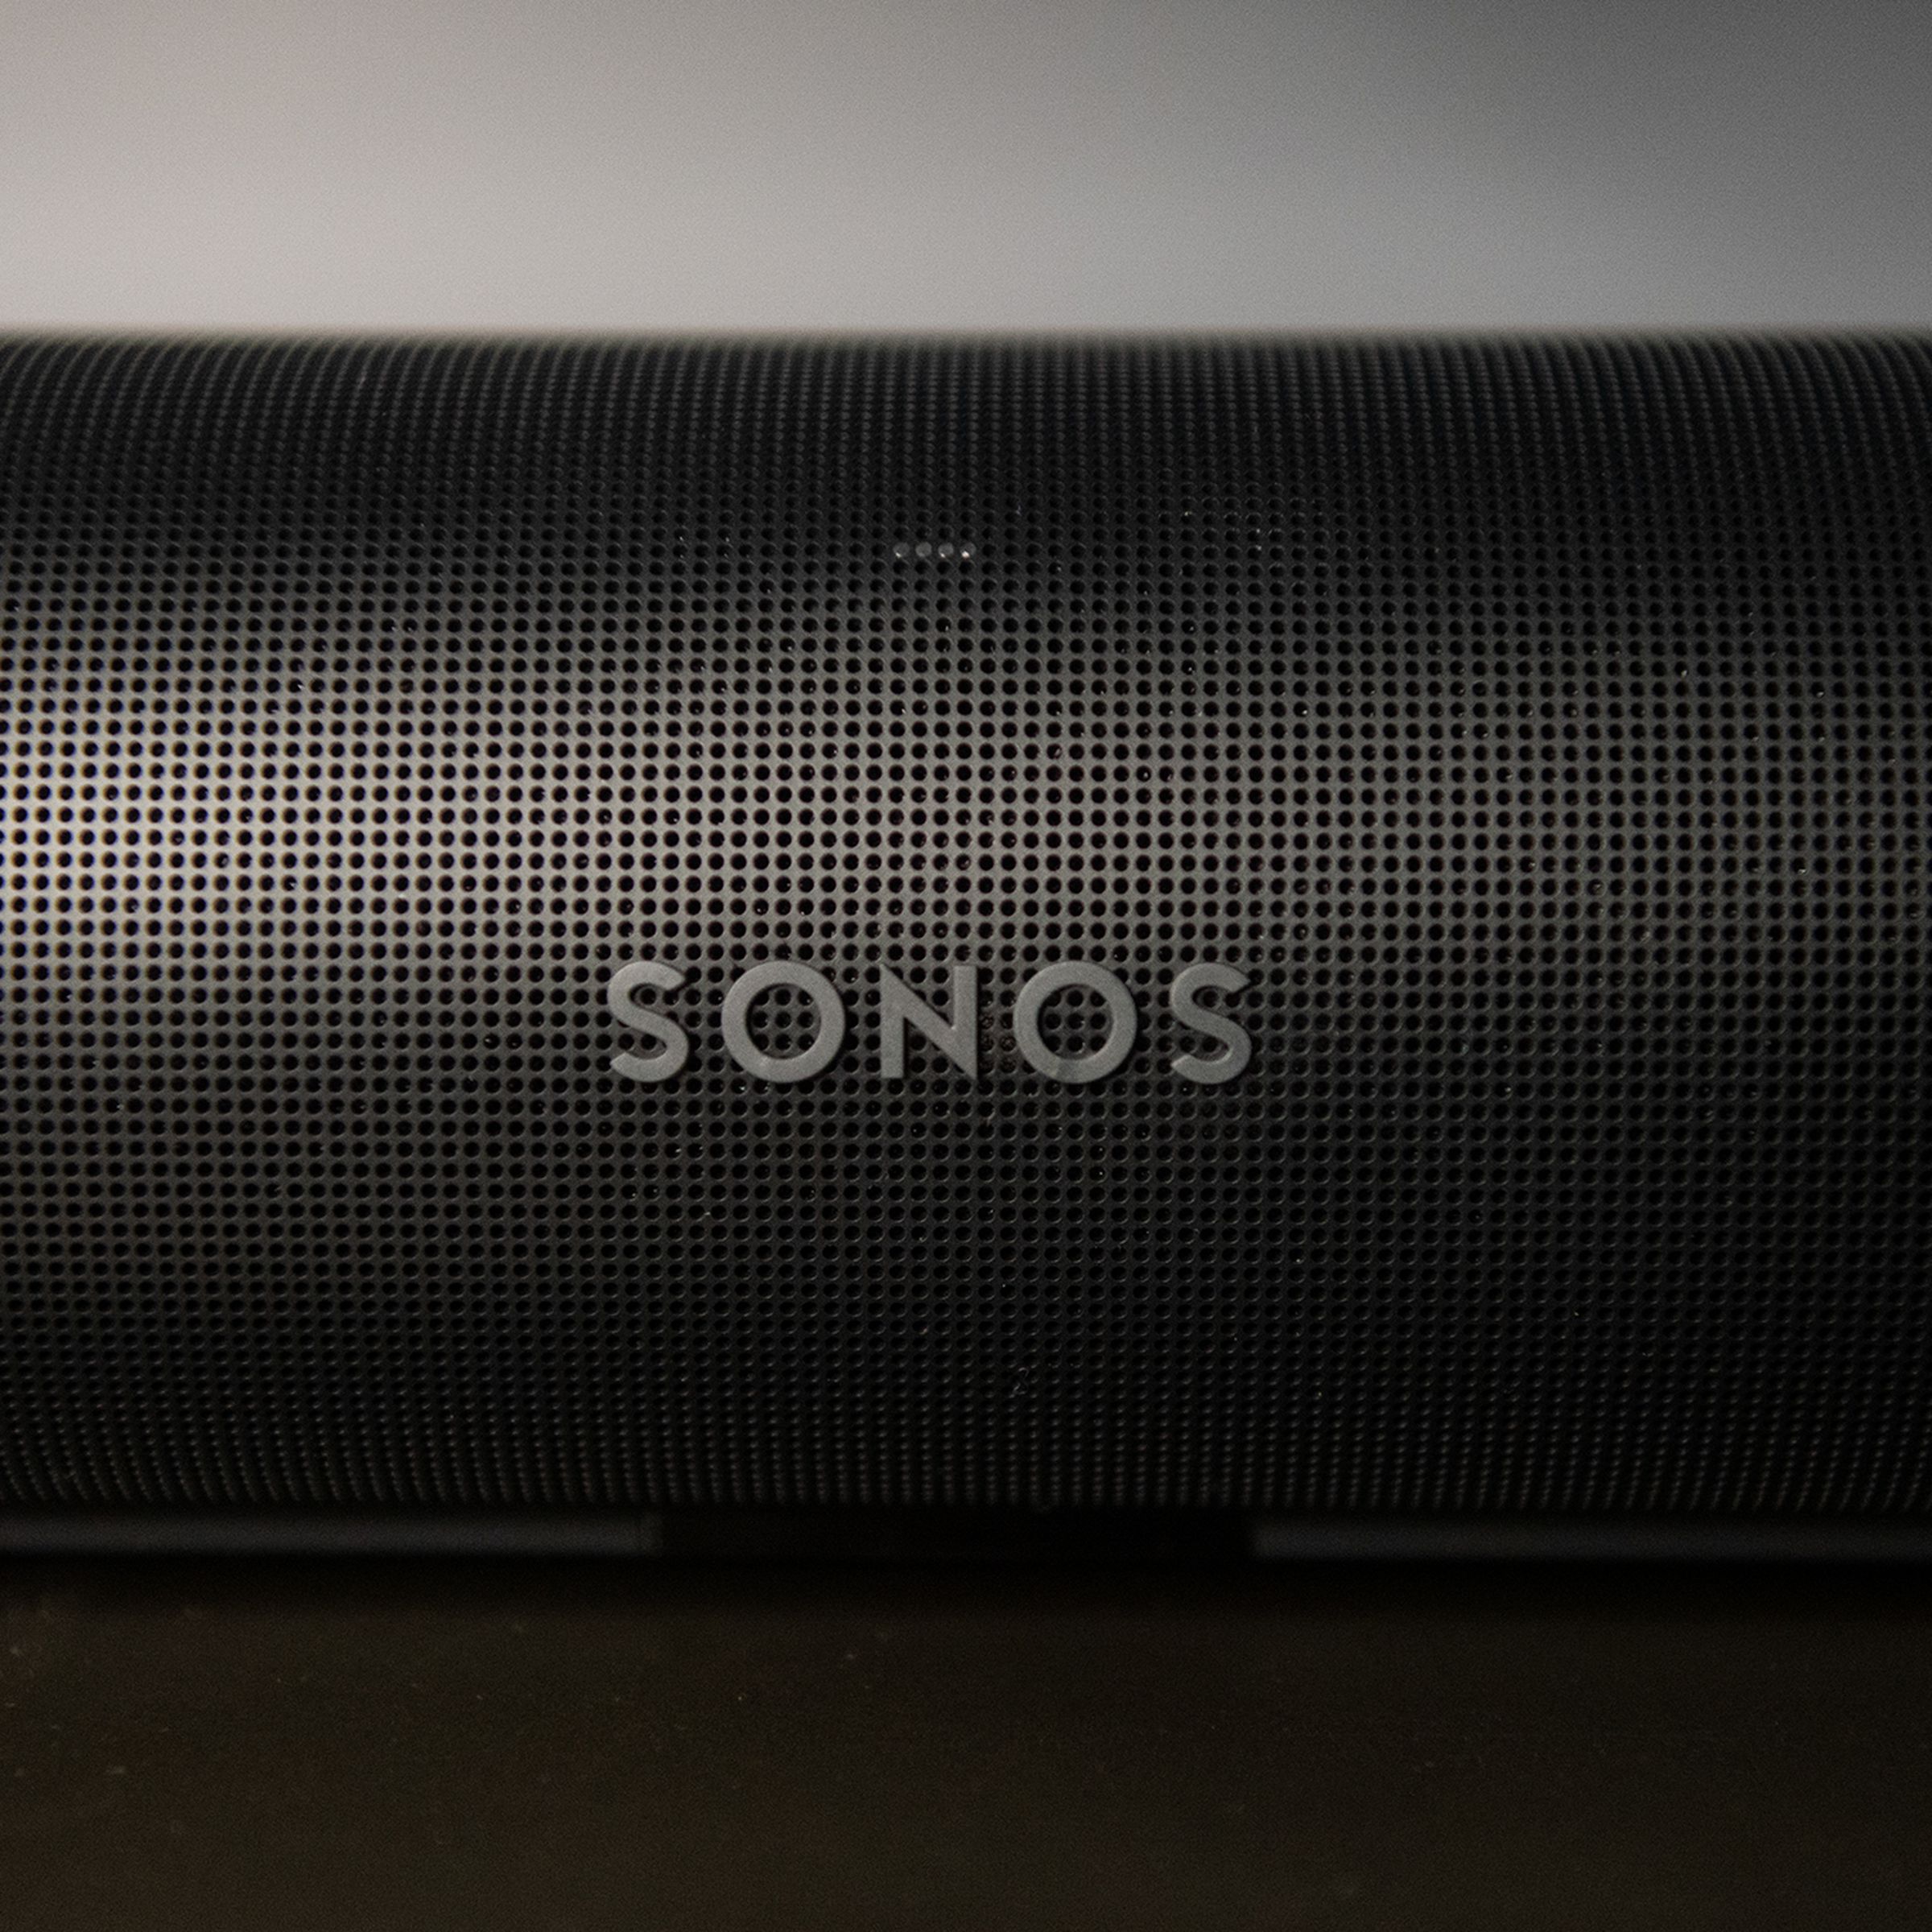 A detail shot of the front of the Sonos Arc, showing the Sonos logo and many perforated holes in the outer casing.